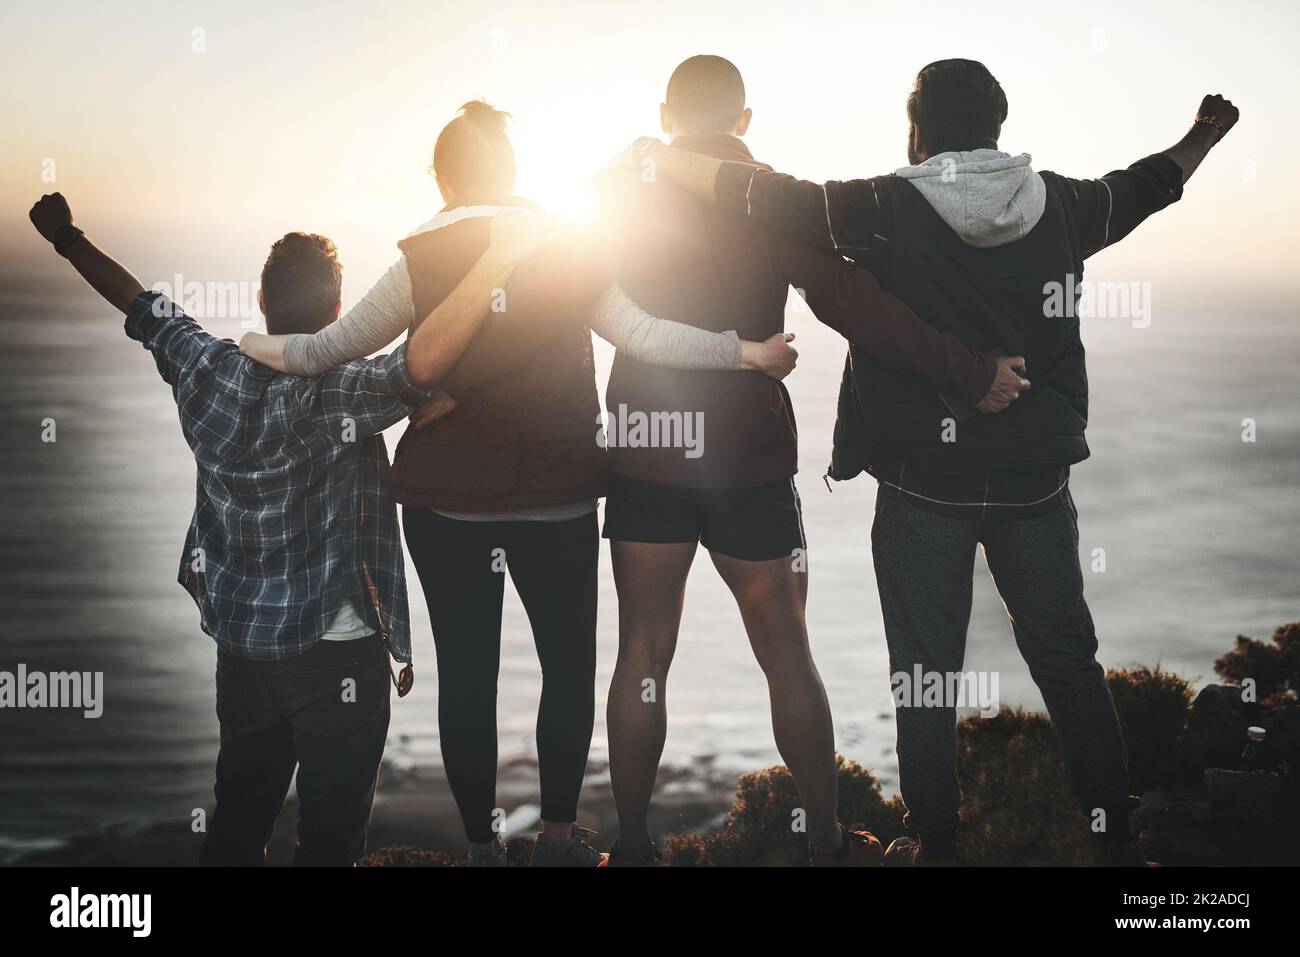 Theyre proud of themselves. Rearview shot of a group of friends standing with their arms raised on a mountain cliff. Stock Photo